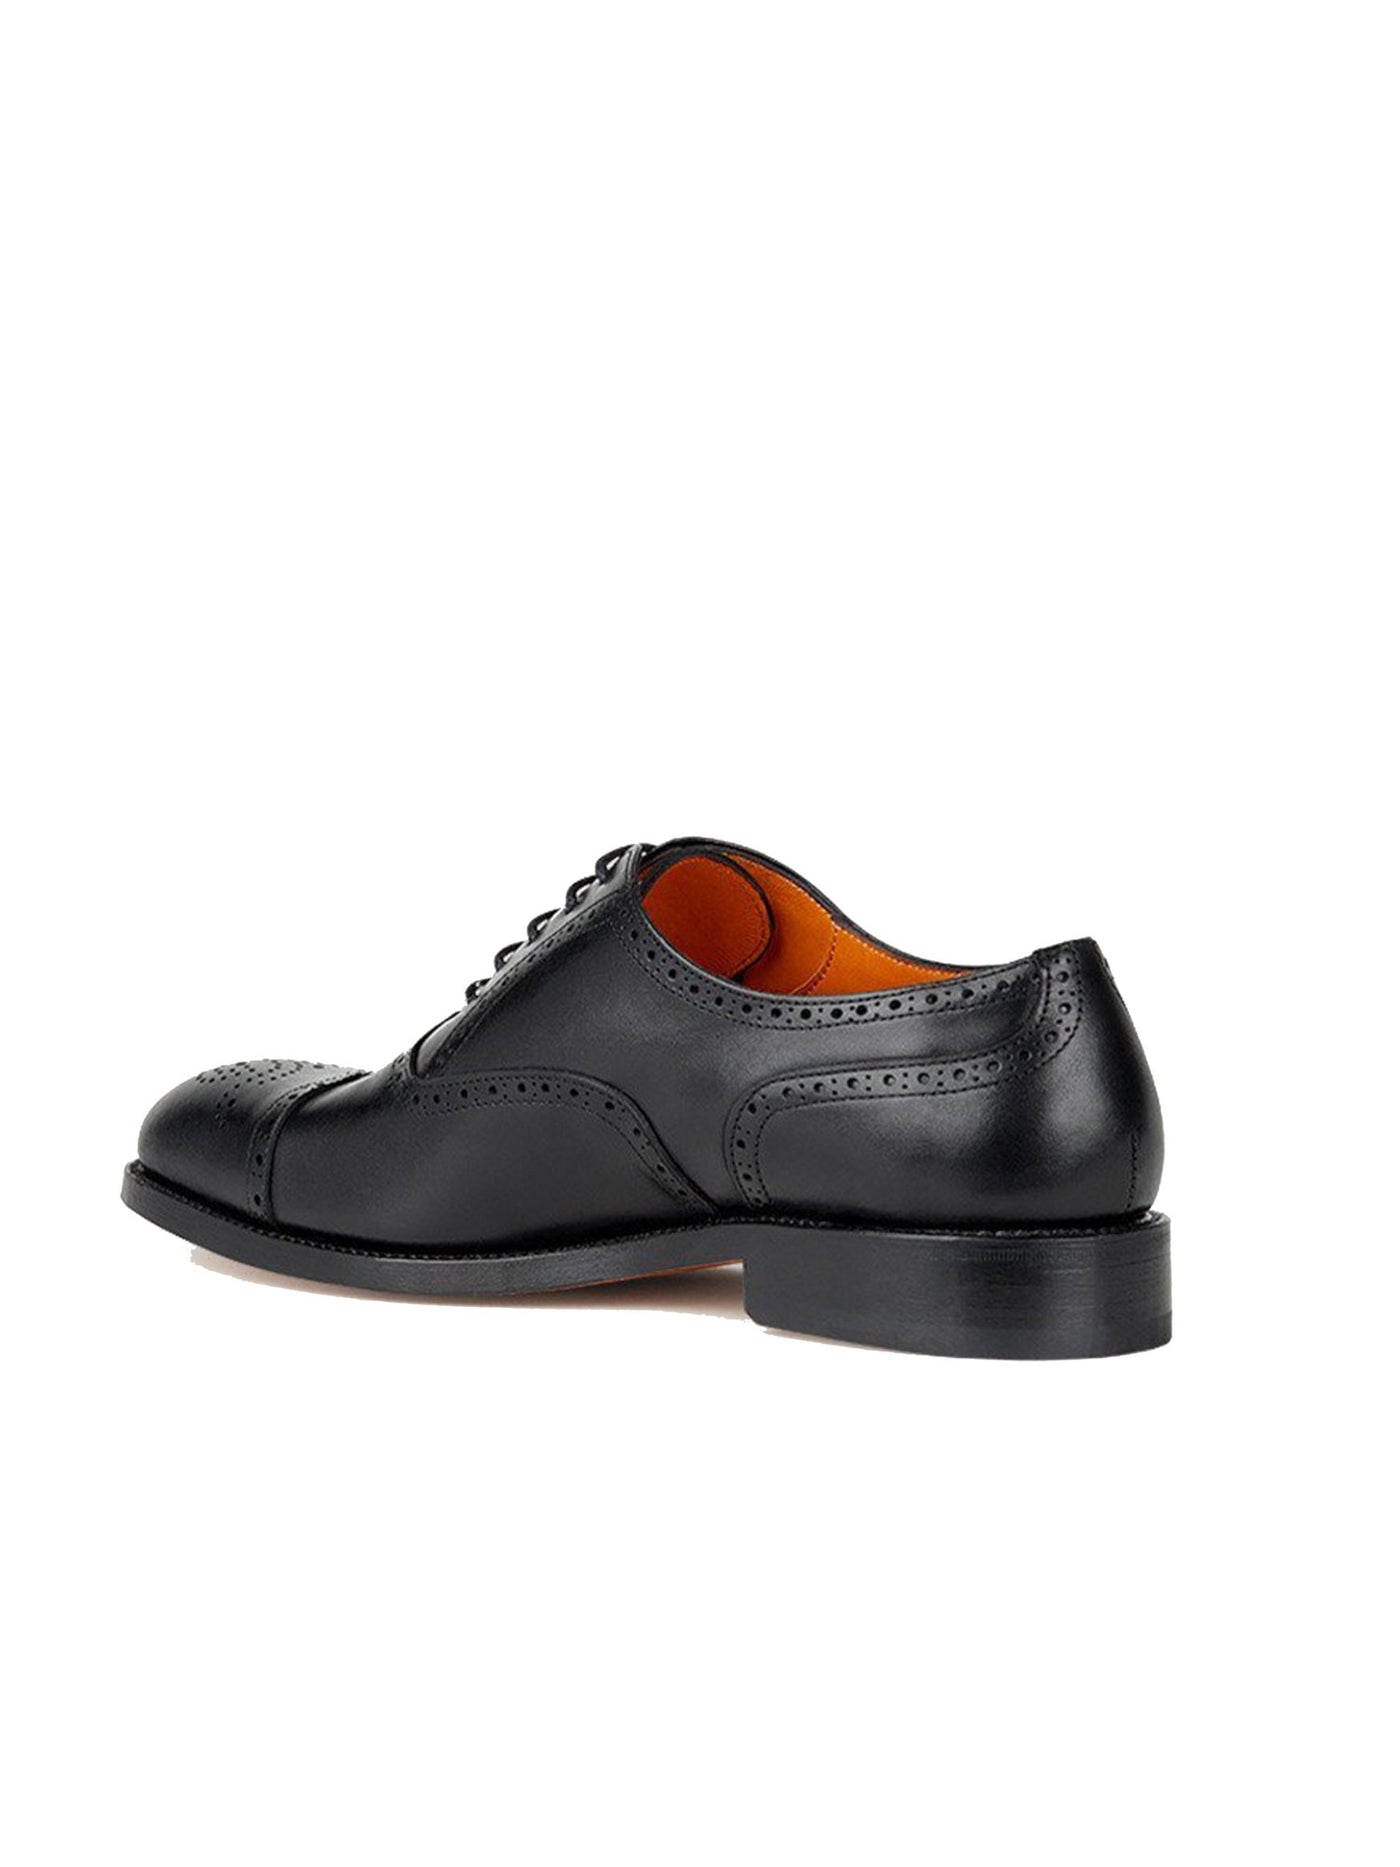 CROSBY SQUARE Mens Black Perforated Comfort Jermyn Cap Toe Block Heel Lace-Up Leather Oxford Shoes 44